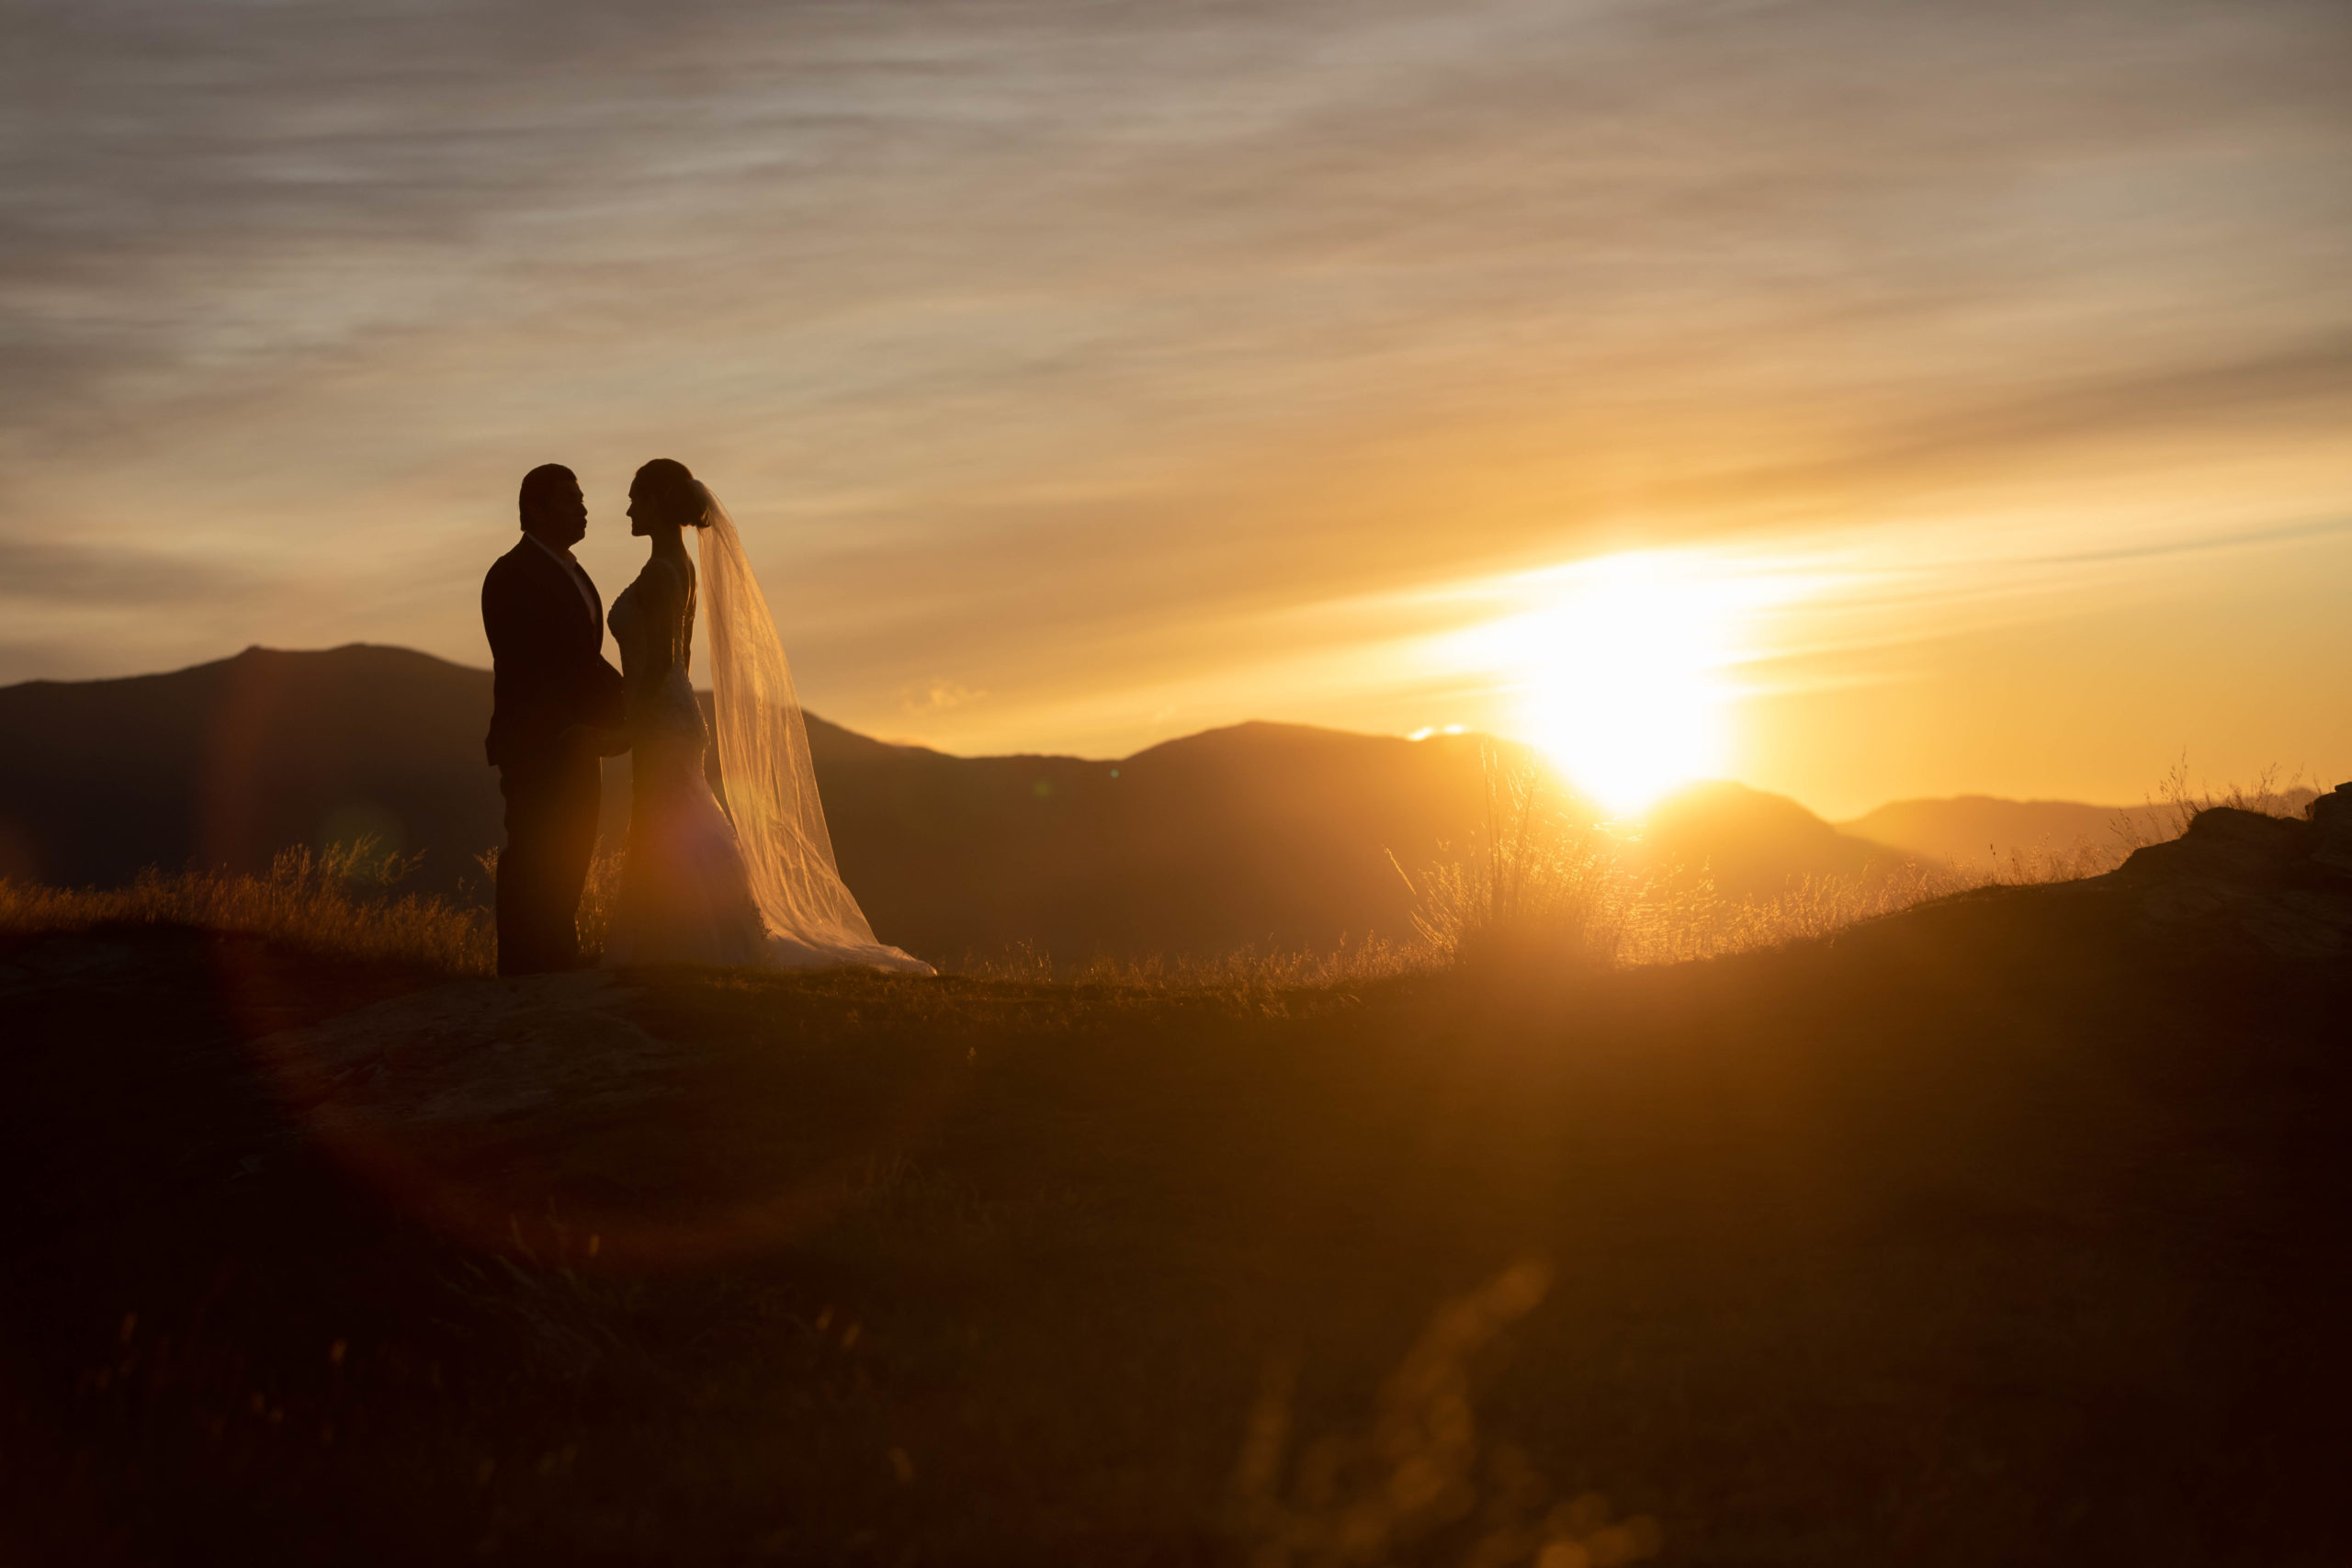 Bride and groom with sunrise in Queenstown